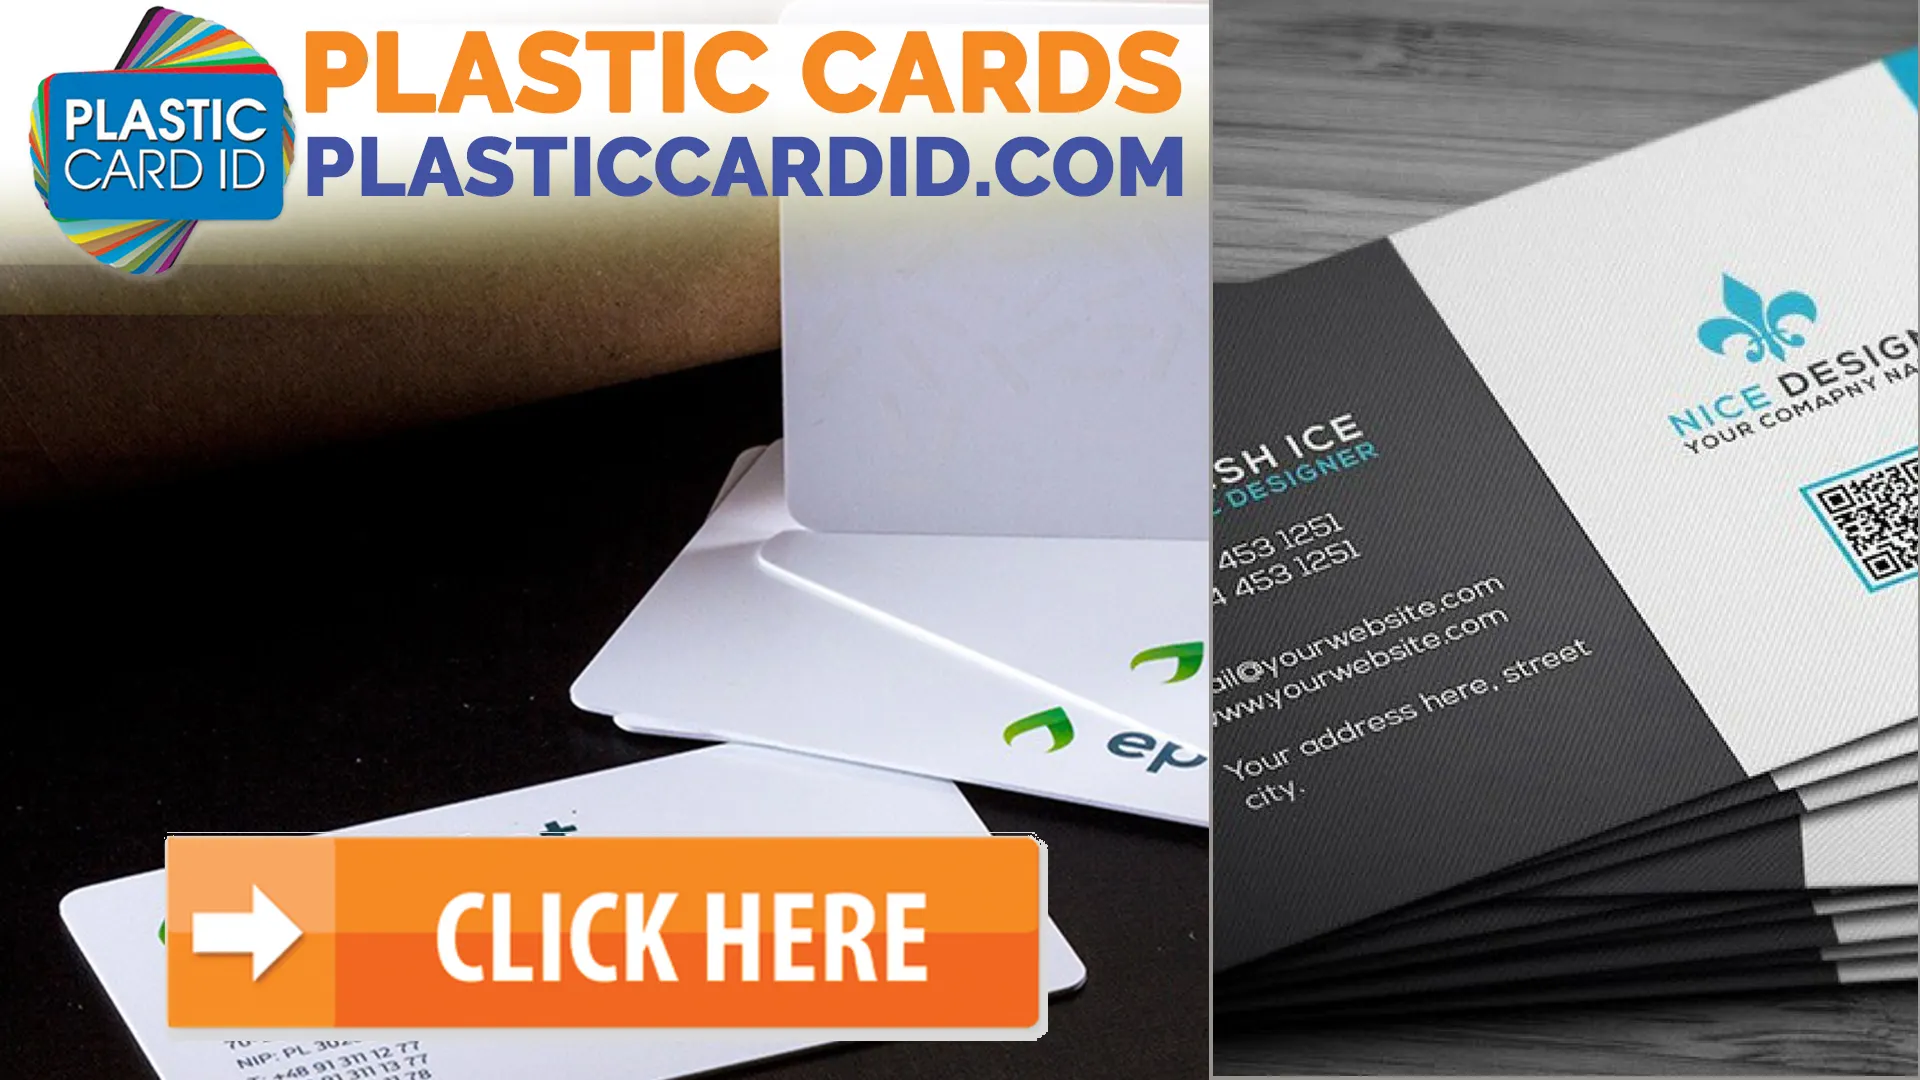 Prepaid Plastic Cards as a Business Multi-Tool